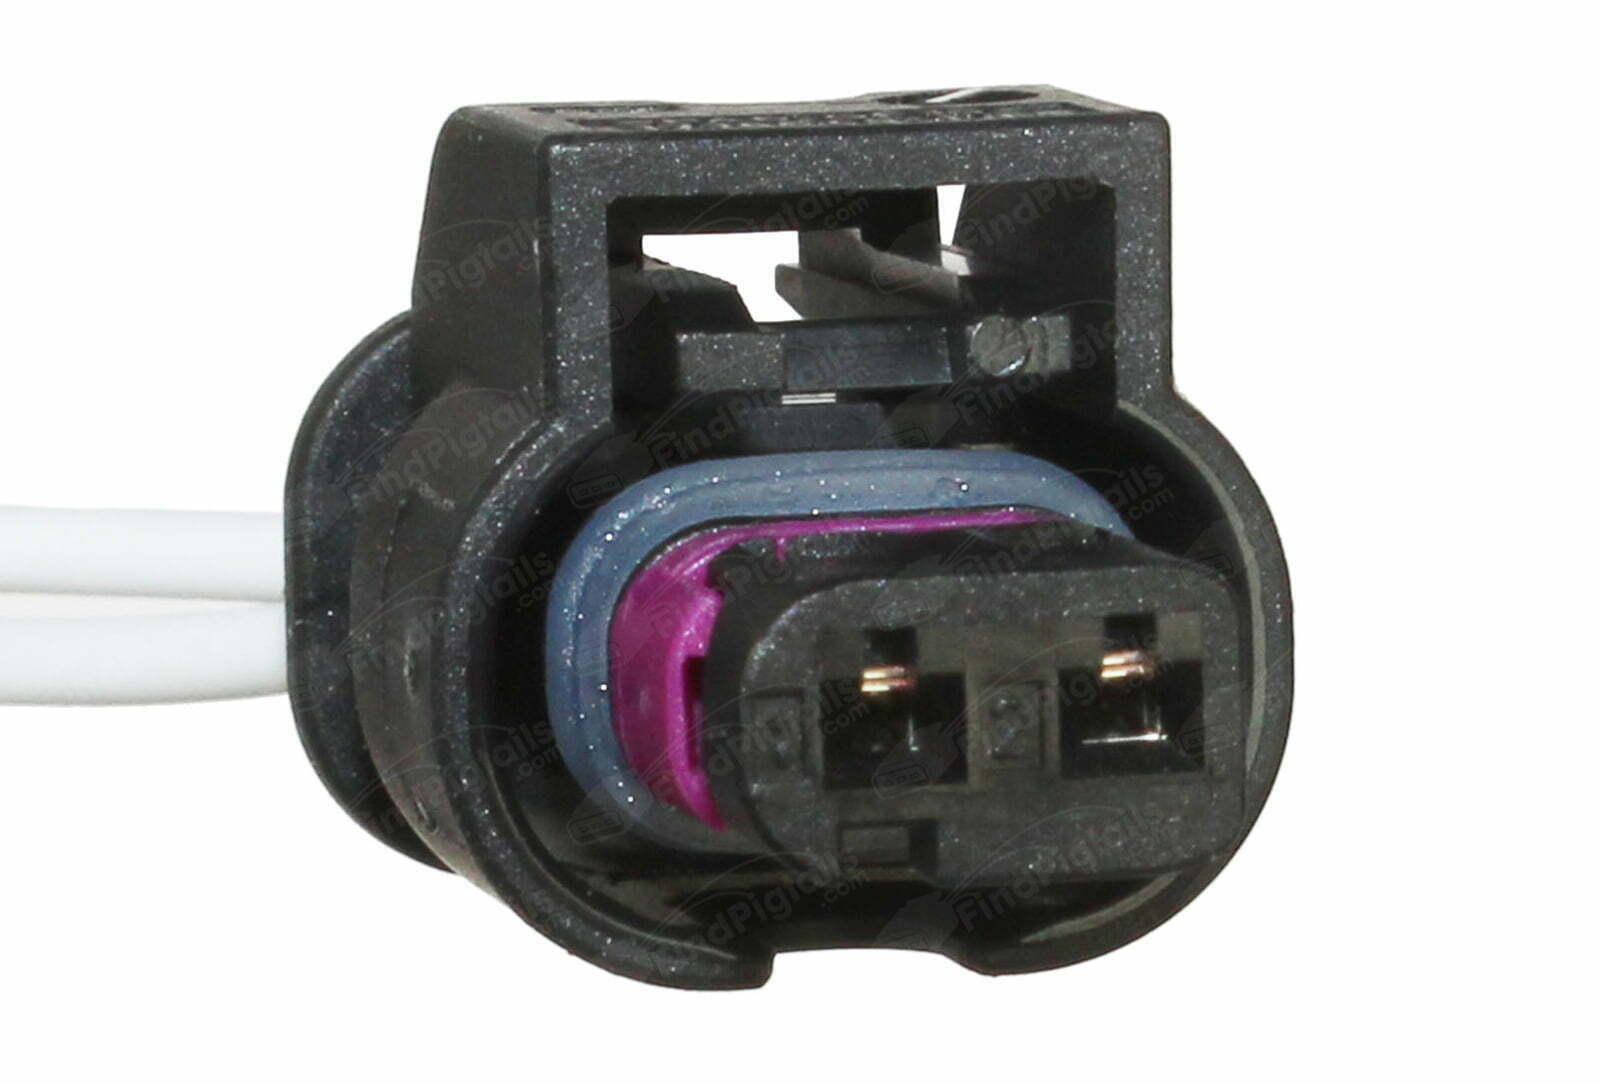 D24B2 is a 2-pin automotive connector which serves at least 35 functions for 1+ vehicles.